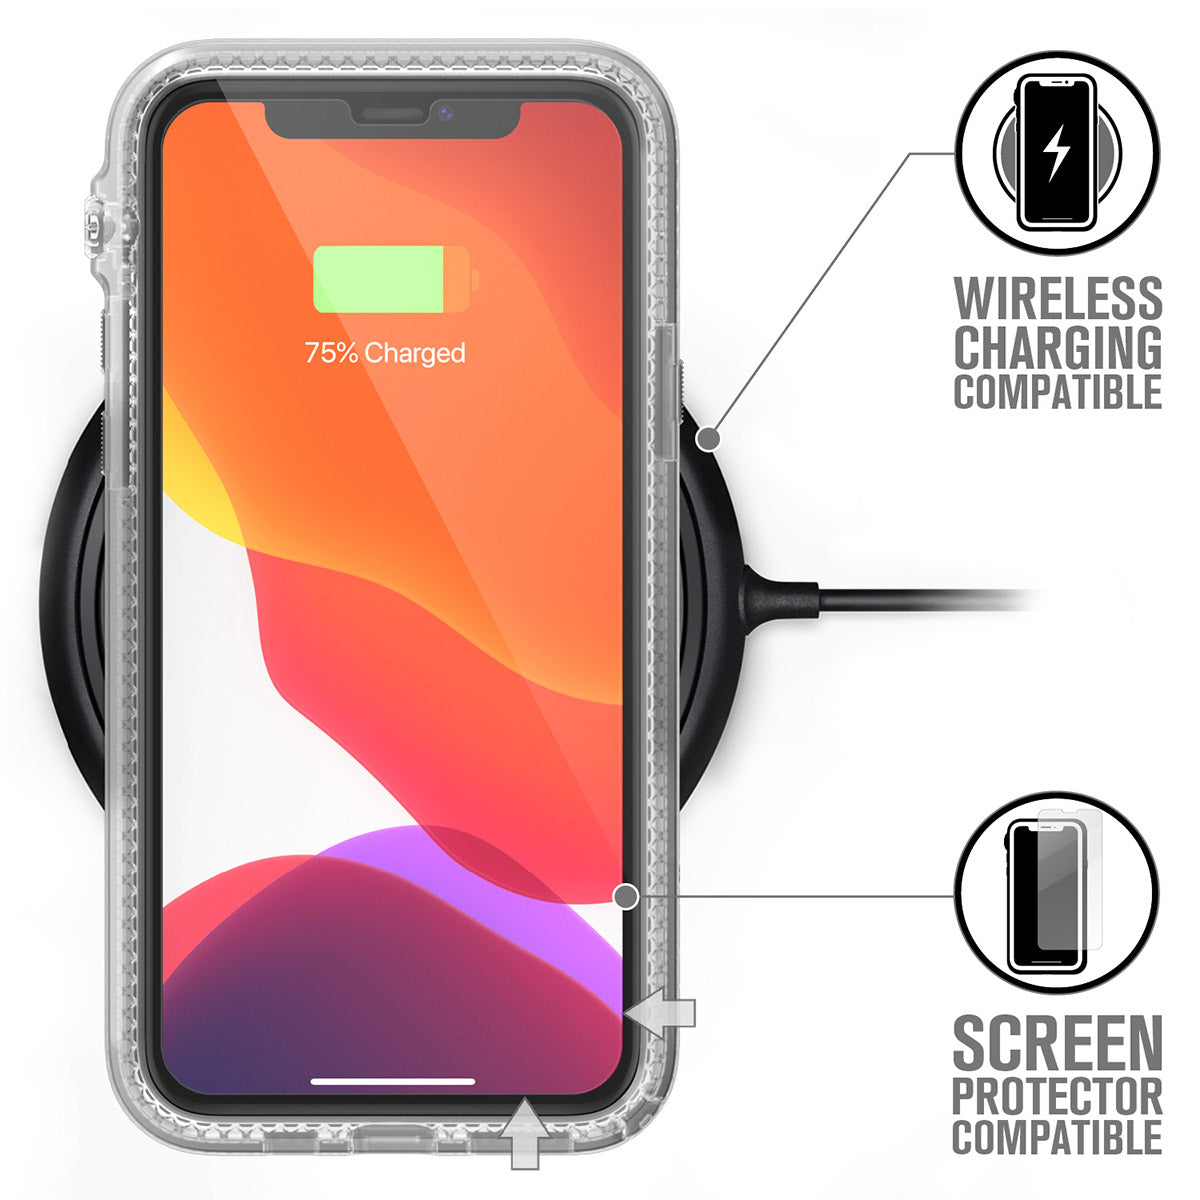 catalyst iPhone 11 series impact protection case for iphone 11 pro clear placed on the wireless charger 75% charged text reads wireless charging compatible screen protector compatible